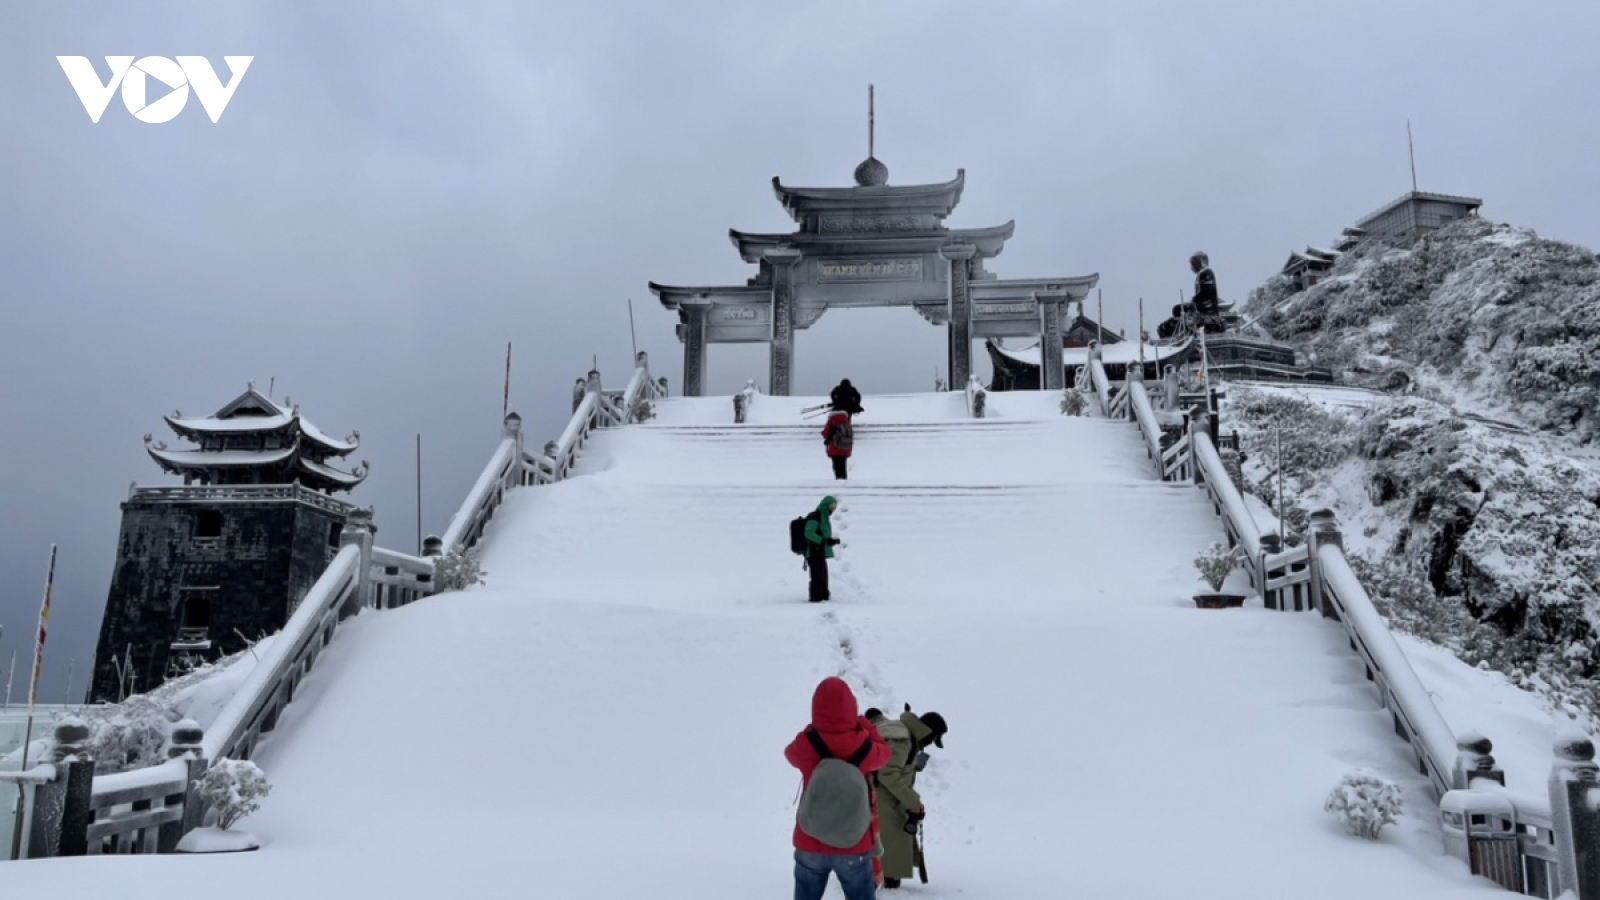 Fansipan Mt. in thick blanket of snow again as temperature falls to -3